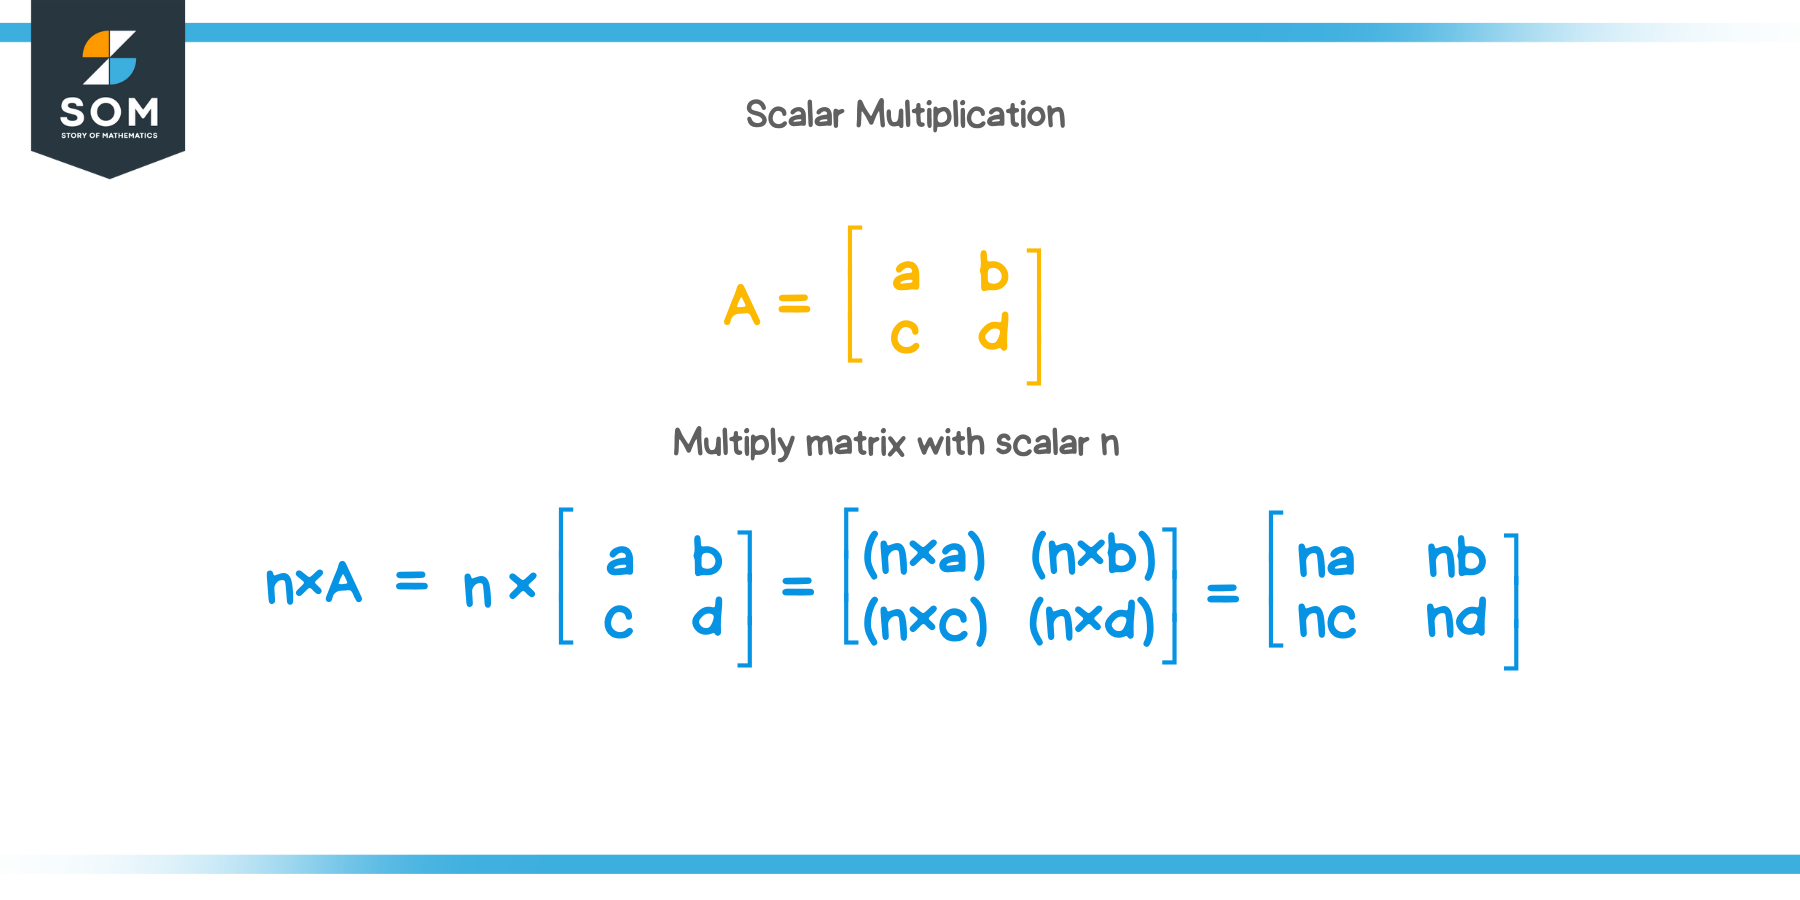 How to multiply a matrix by a scalar?